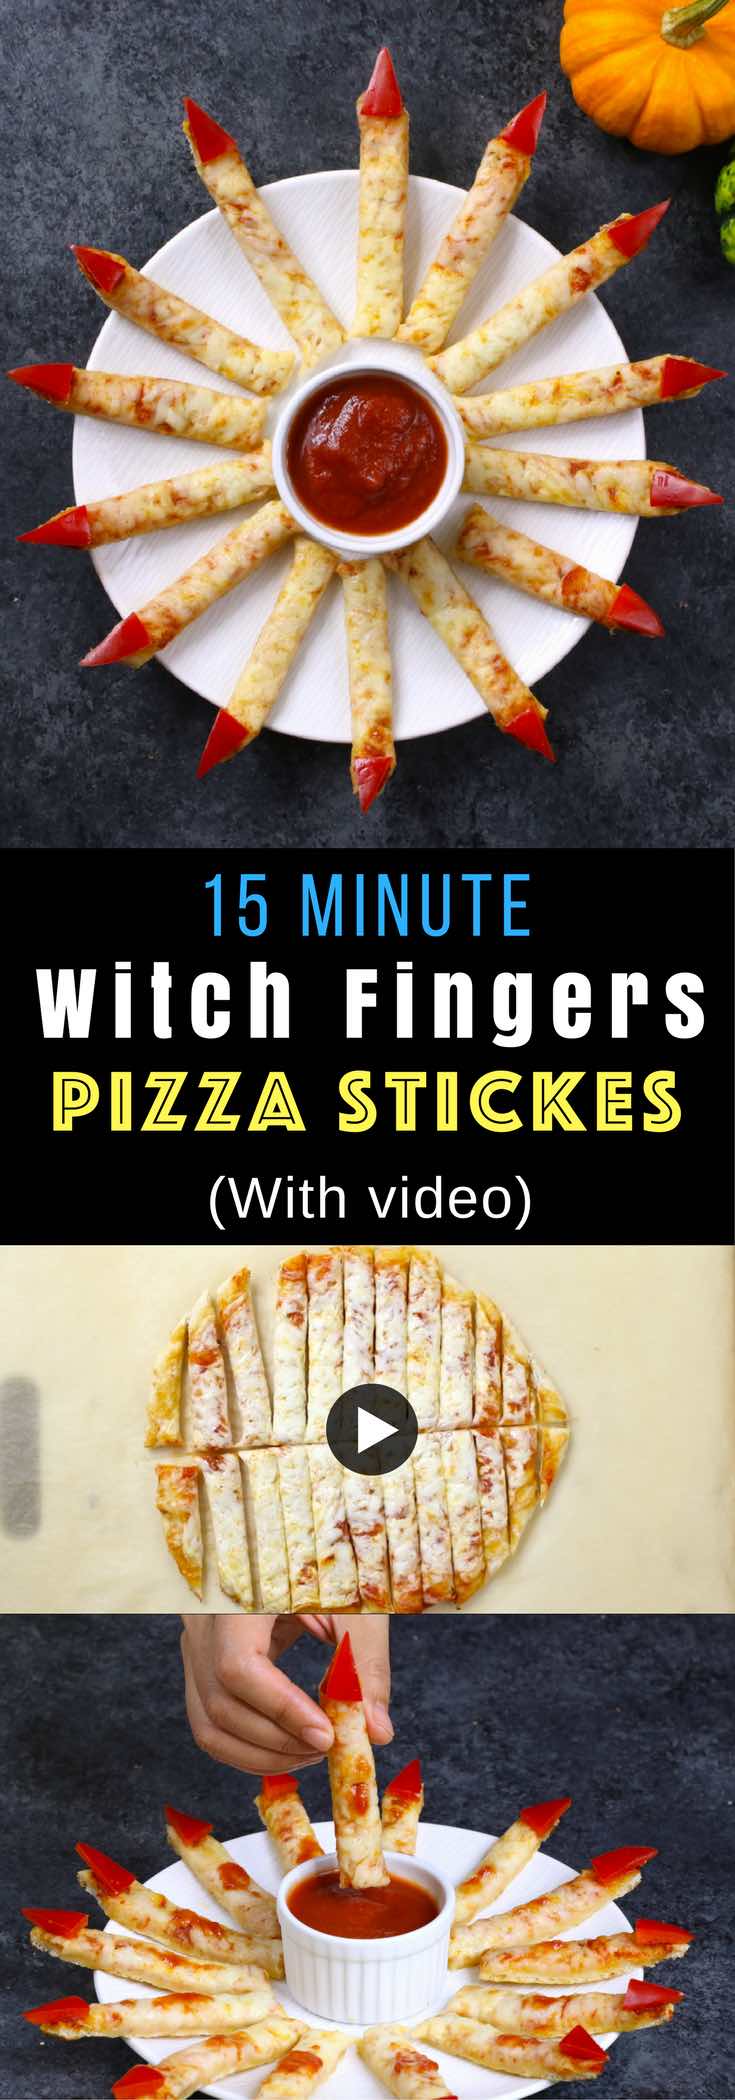 These Witch's Fingers are a quick and easy appetizer for a Halloween party. These pizza fingers are easy to make in just 20 minutes! #pizzafingers #pizzasticks #halloweenpizza